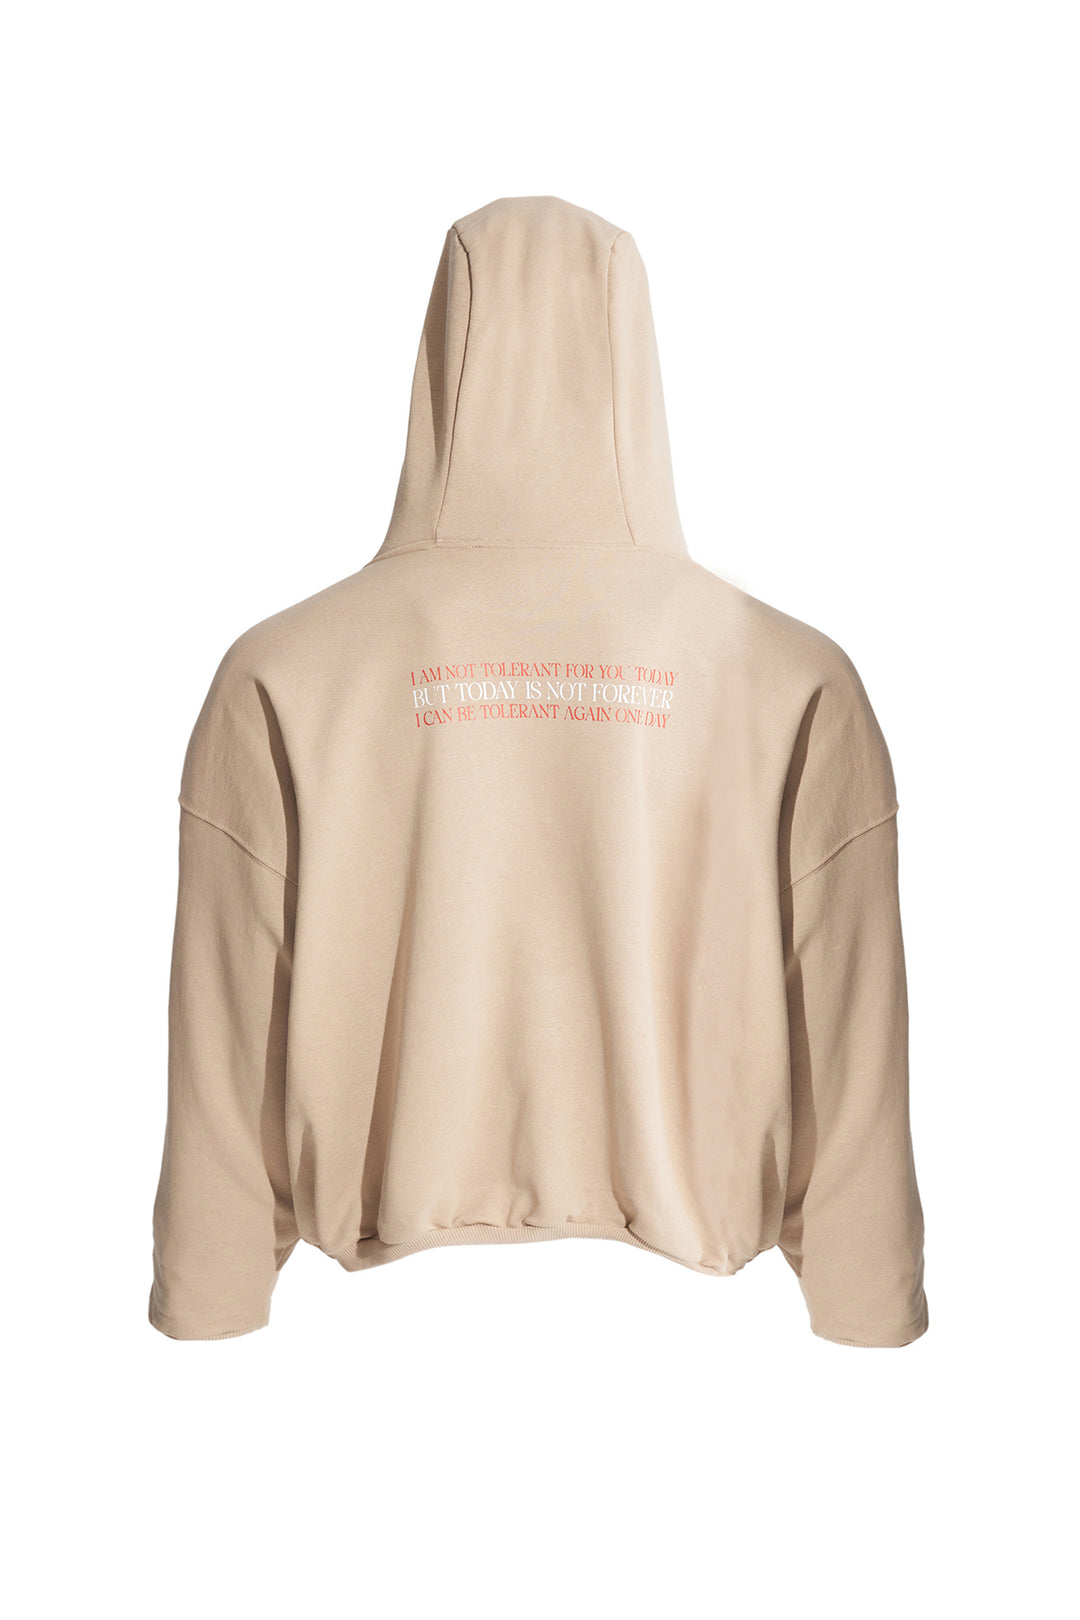 Stressed / Oversized Double Layer Pullover Hoodie